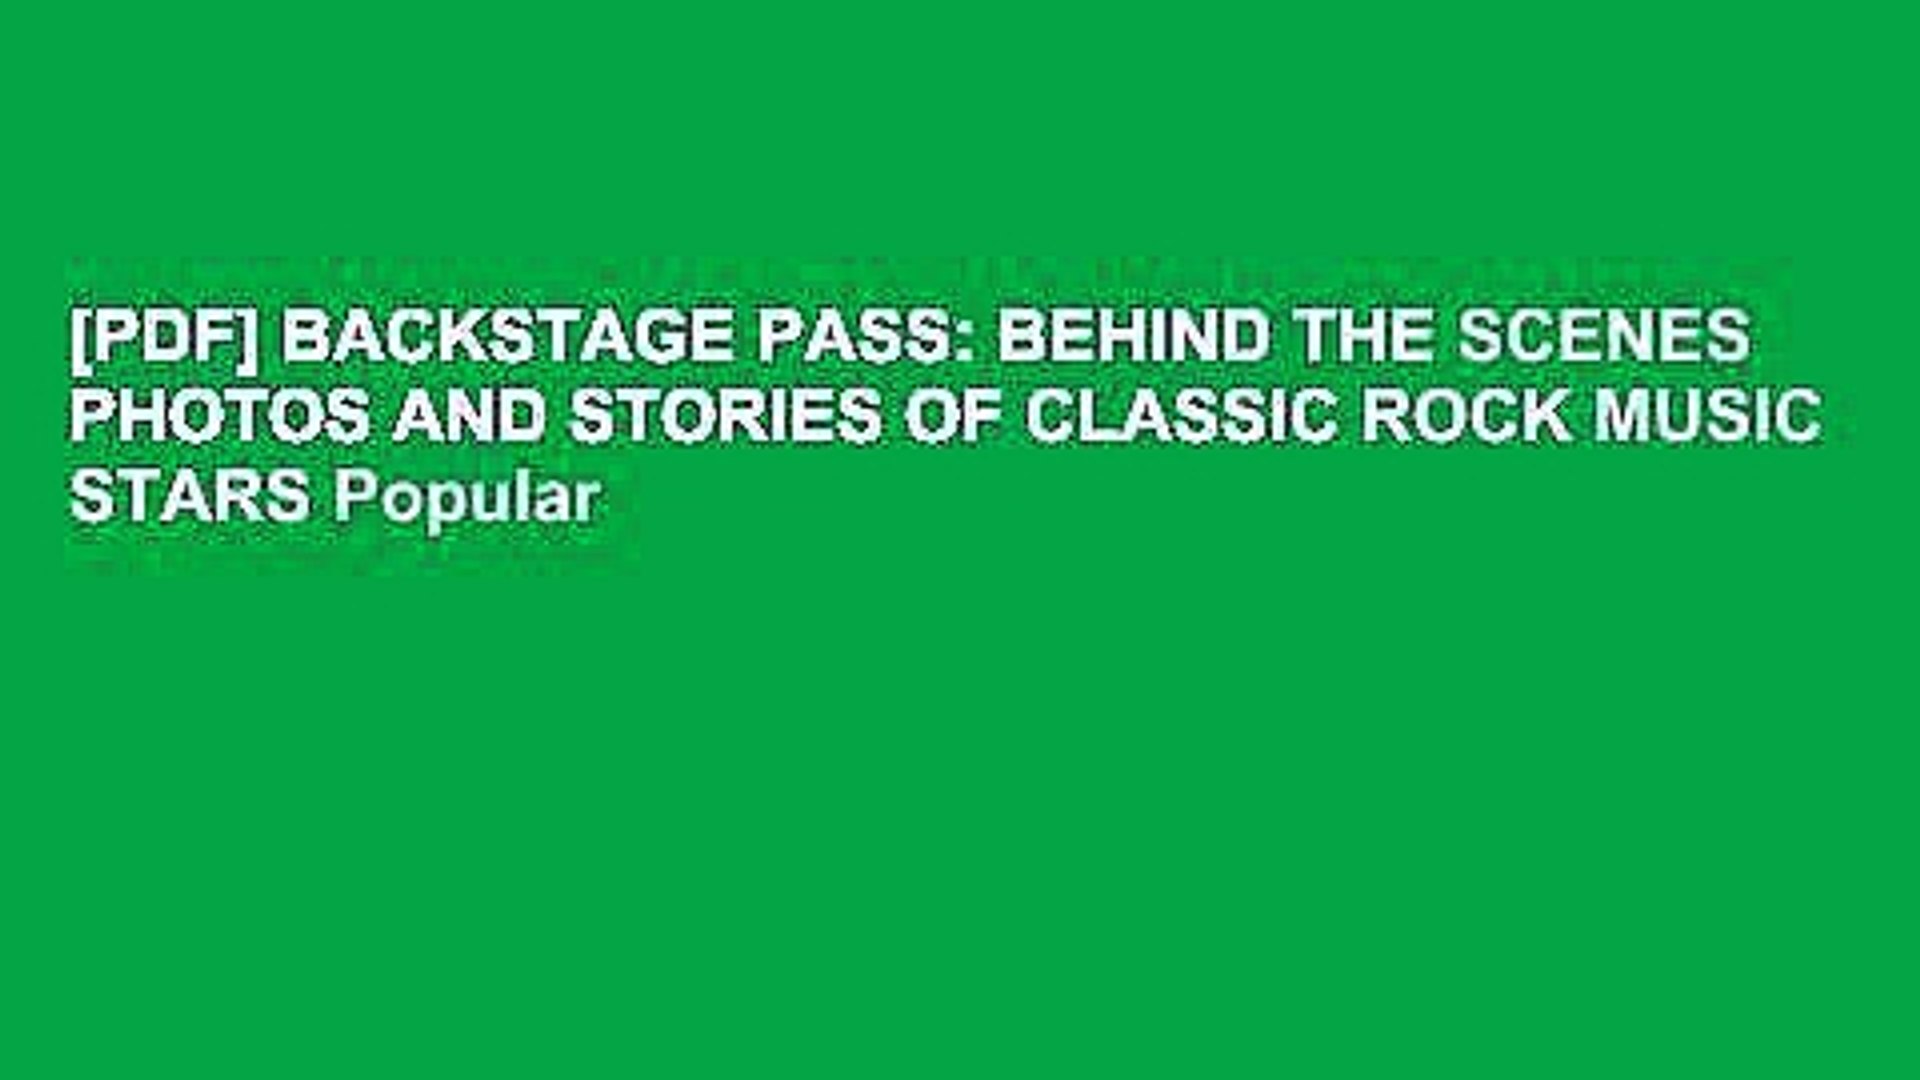 [PDF] BACKSTAGE PASS: BEHIND THE SCENES PHOTOS AND STORIES OF CLASSIC ROCK MUSIC STARS Popular